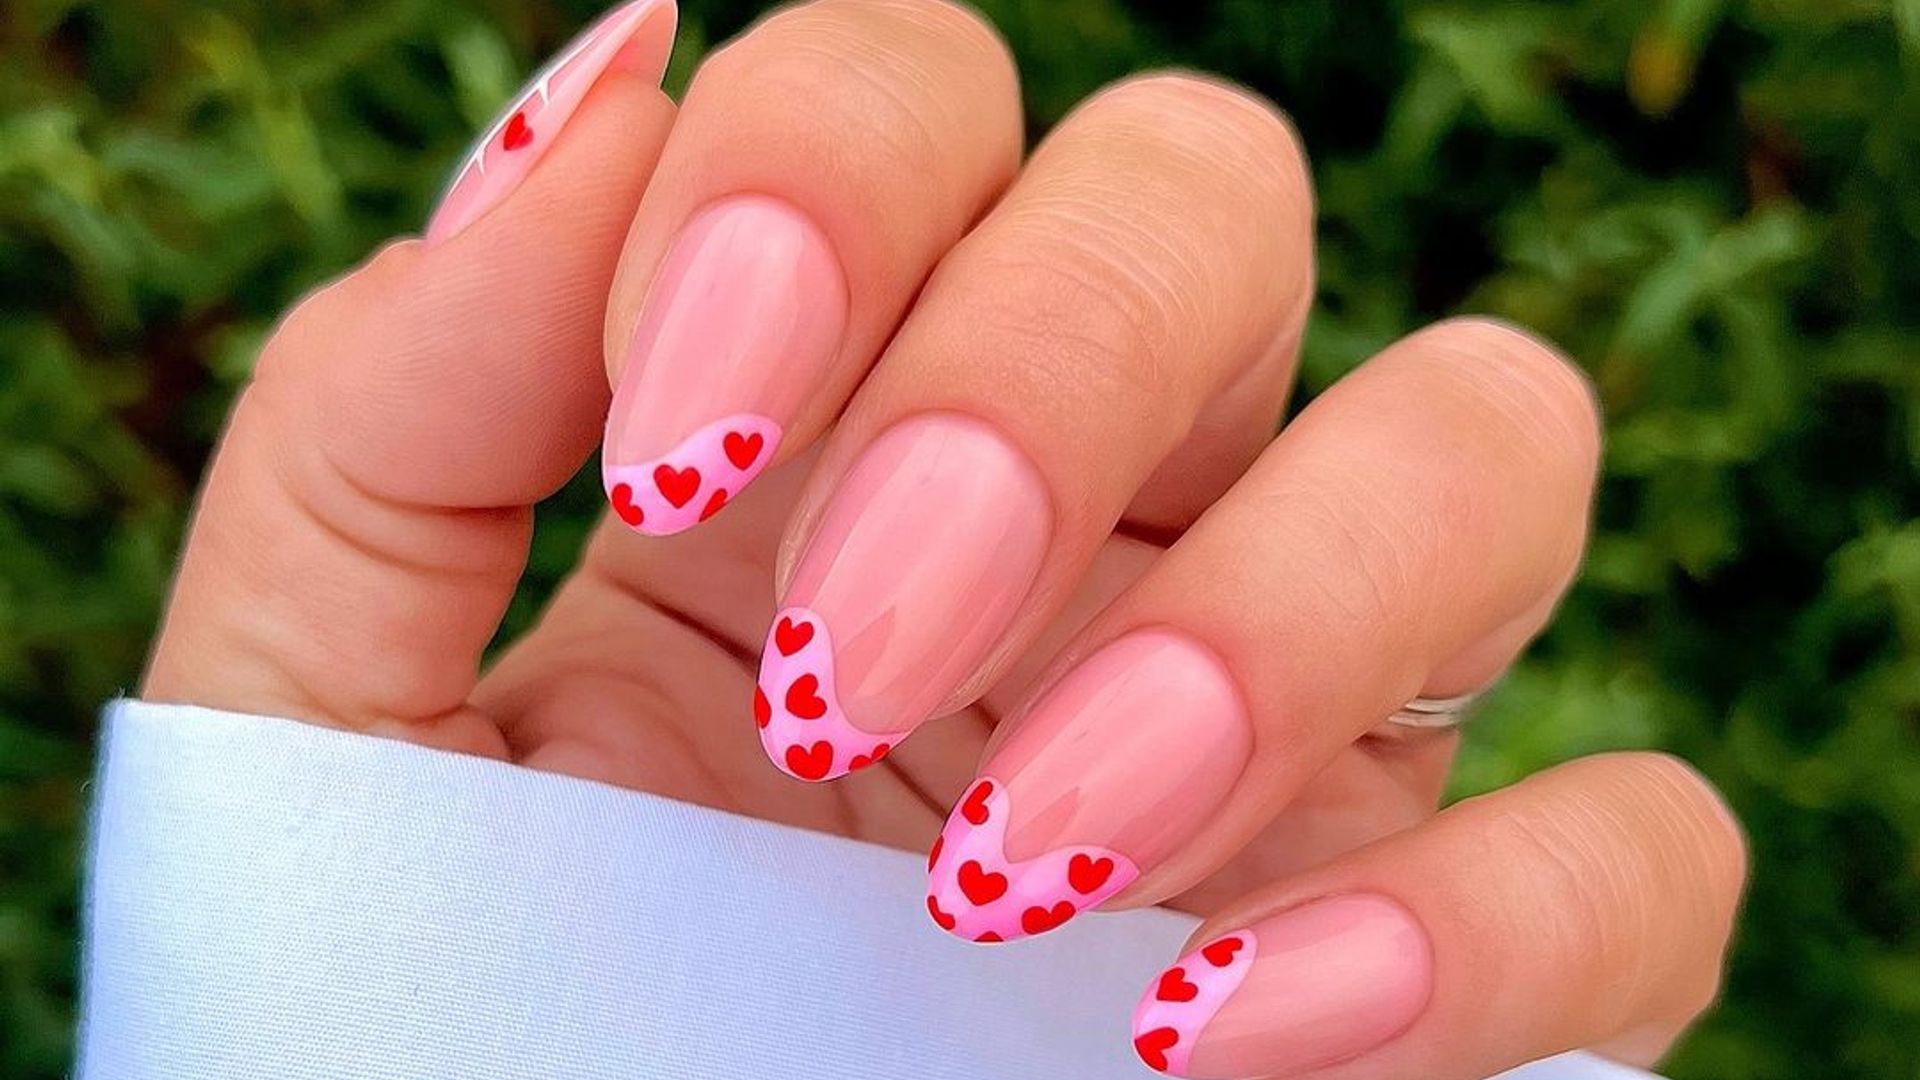 Nails with pink tips and red hearts 